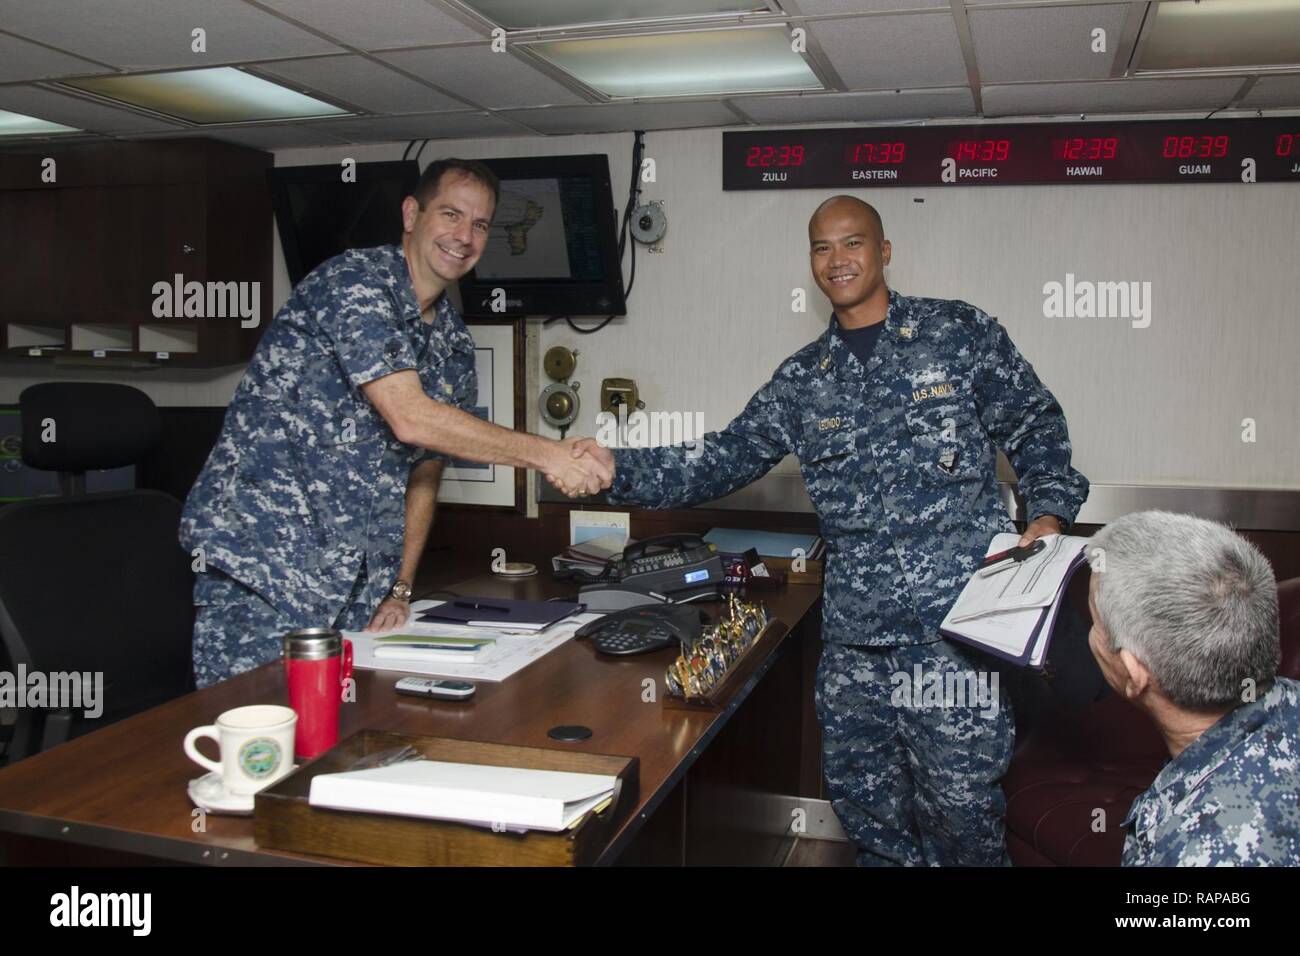 SANTA RITA, Guam - The submarine tender USS Frank Cable (AS 40) Commanding Officer Capt. Drew St. John congratulated Chief Damage Controlman Cyprus V. Abundo, native of Angeles City, Philippines, for his selection as the winner of the 2016 GEICO Military Service Award - Fire Safety and Prevention, Feb. 10.  Frank Cable, forward deployed to the island of Guam, conducts maintenance and support of submarines and surface vessels deployed to the U.S. 5th and 7th Fleet area of operations. Stock Photo